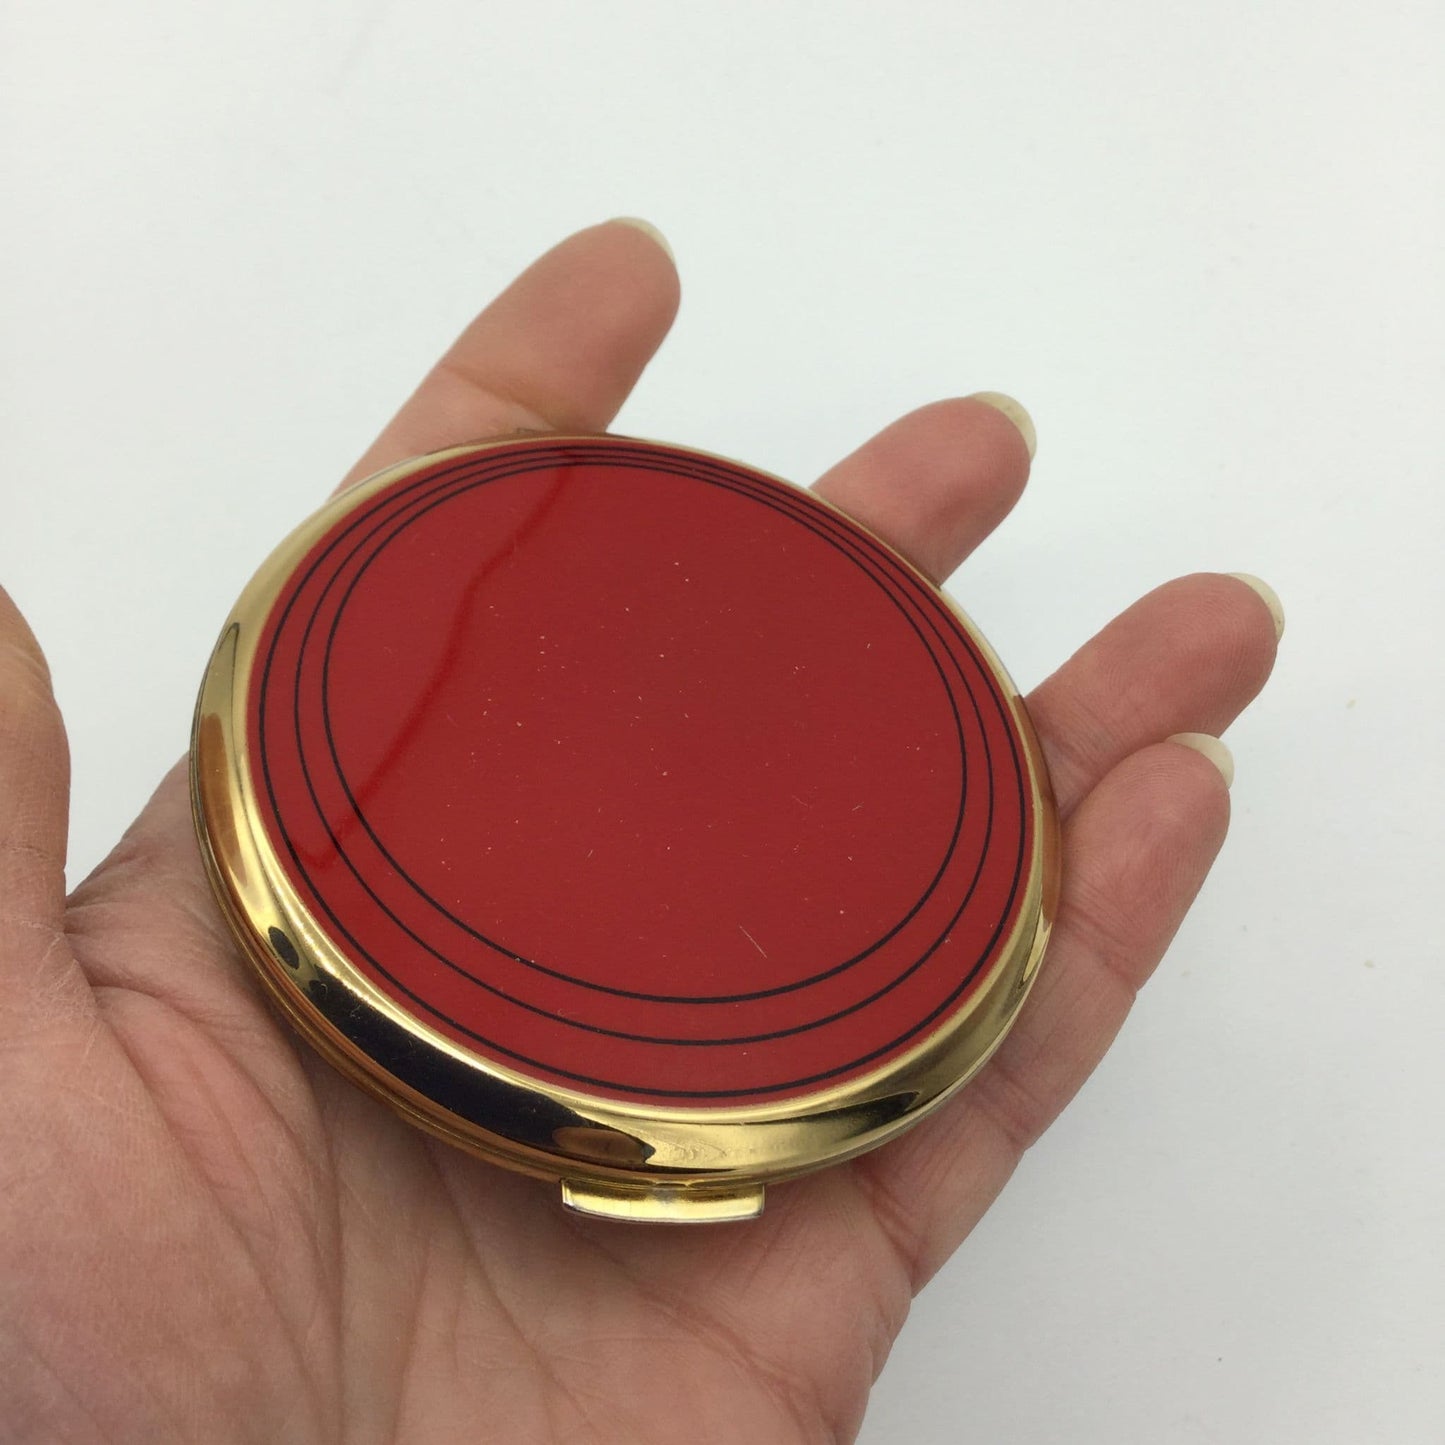 bright red powder compact with gold sides held in a hand